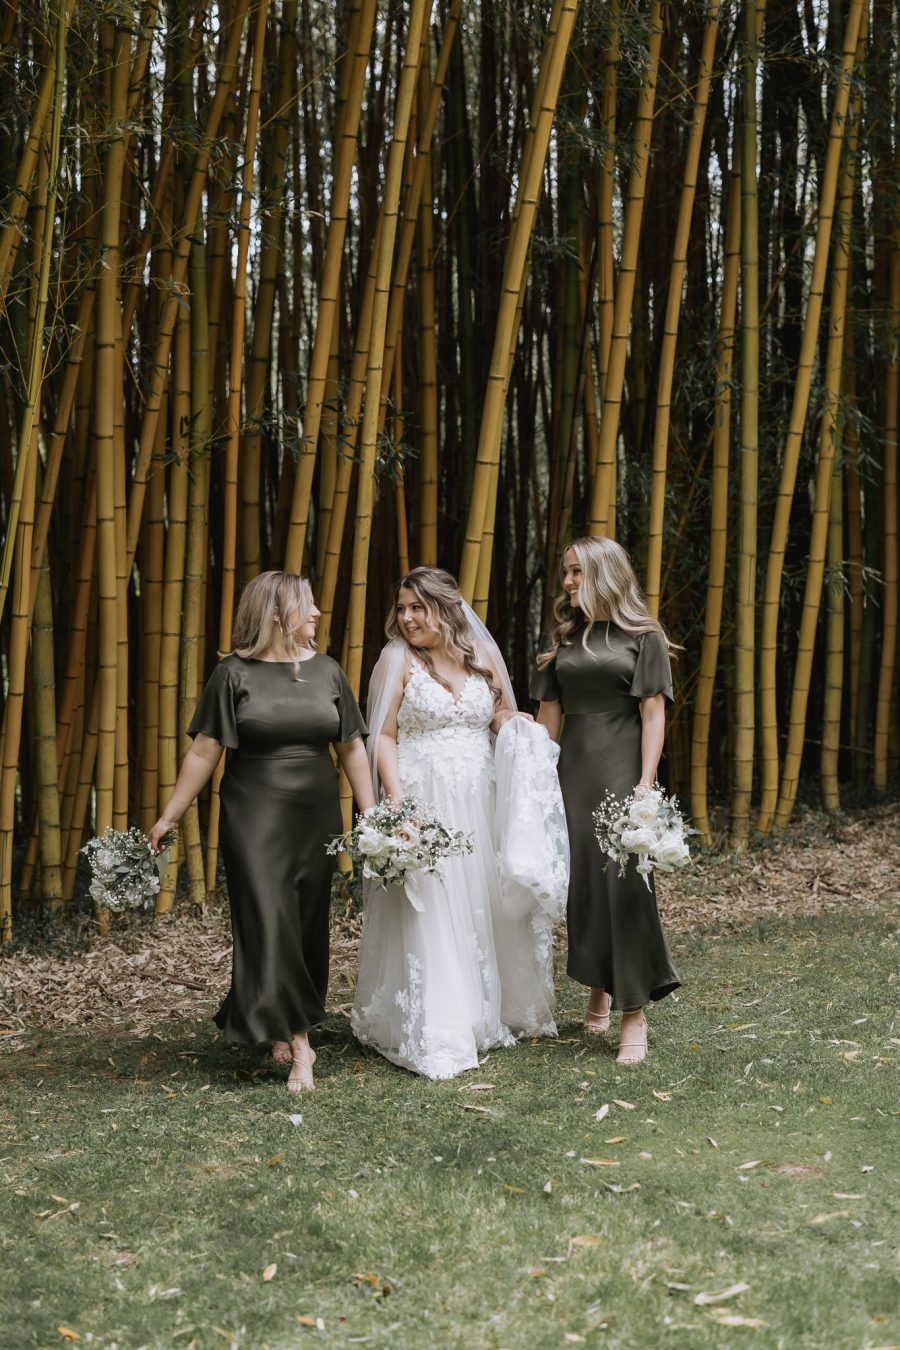 Olive green bridesmaids dresses walking with bride in front of the bamboo trees in olive green black walnut venue